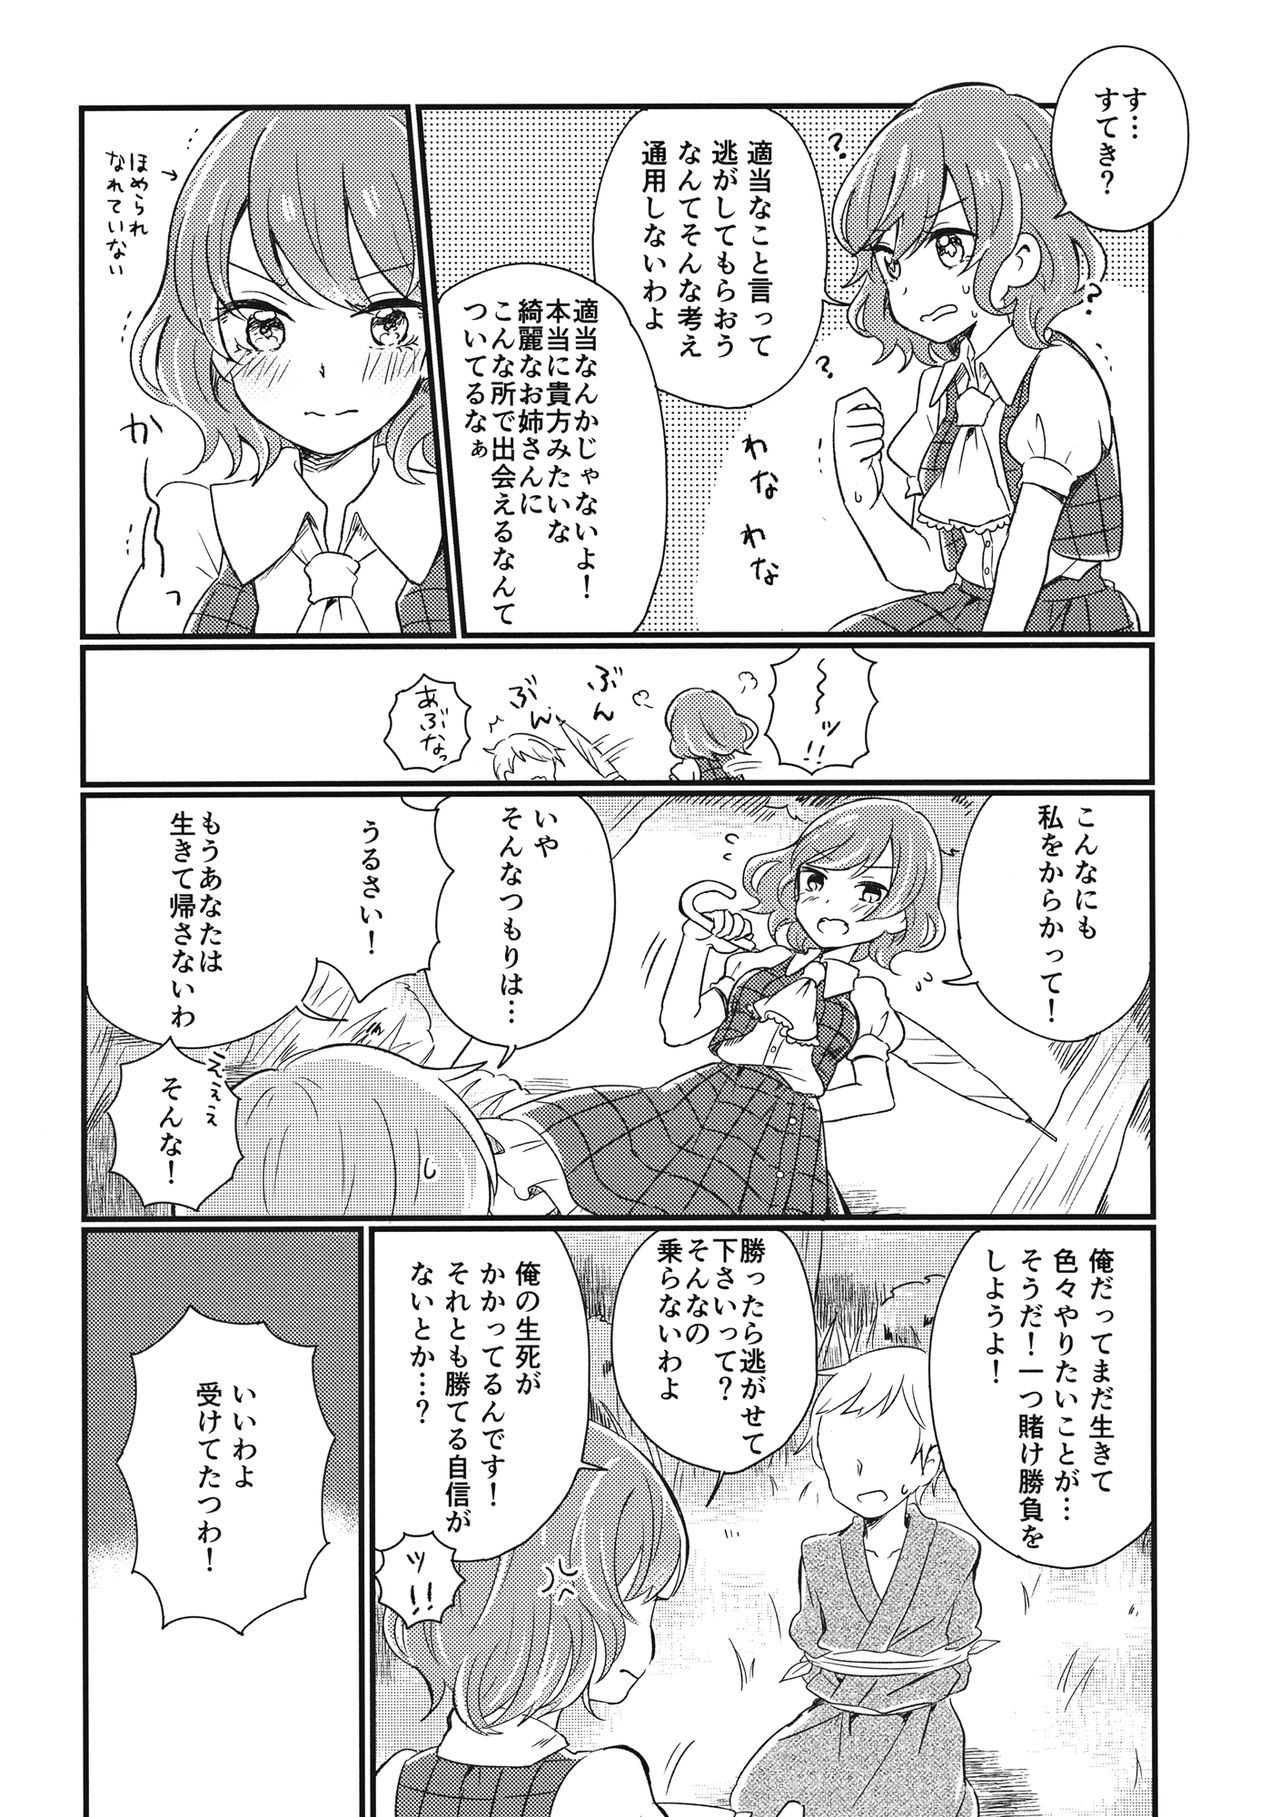 (Reitaisai 12) [border rim (Various)] Touhou Muchi Shichu Goudou - Toho joint magazine sex in the ignorant situations  (Touhou Project) (例大祭12) [border rim (よろず)] 東方むちシチュ合同 (東方Project)